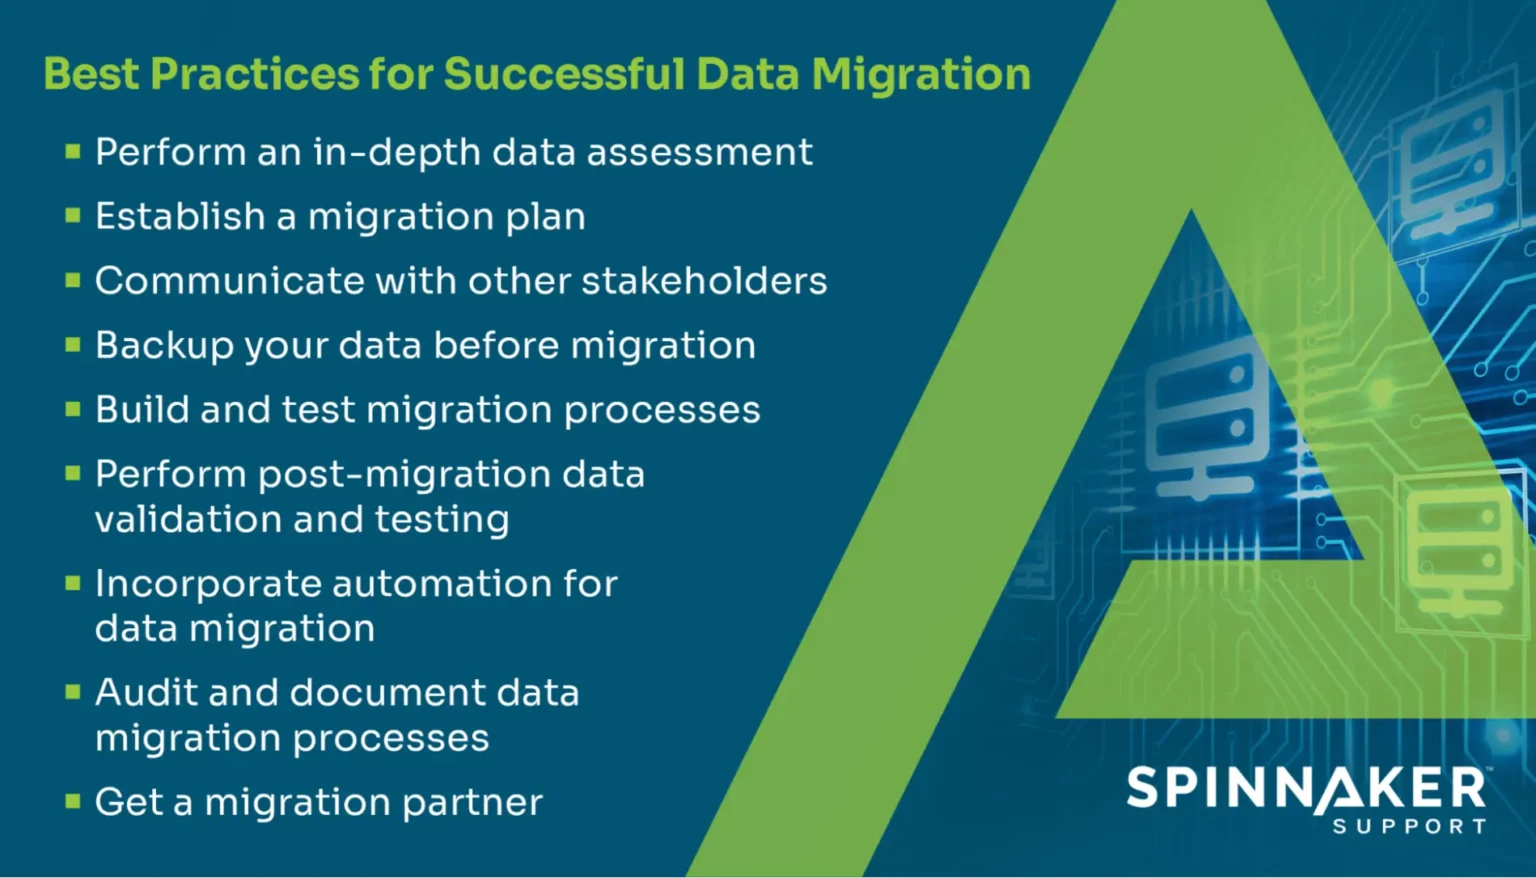 Implementing best practices for a successful data migration